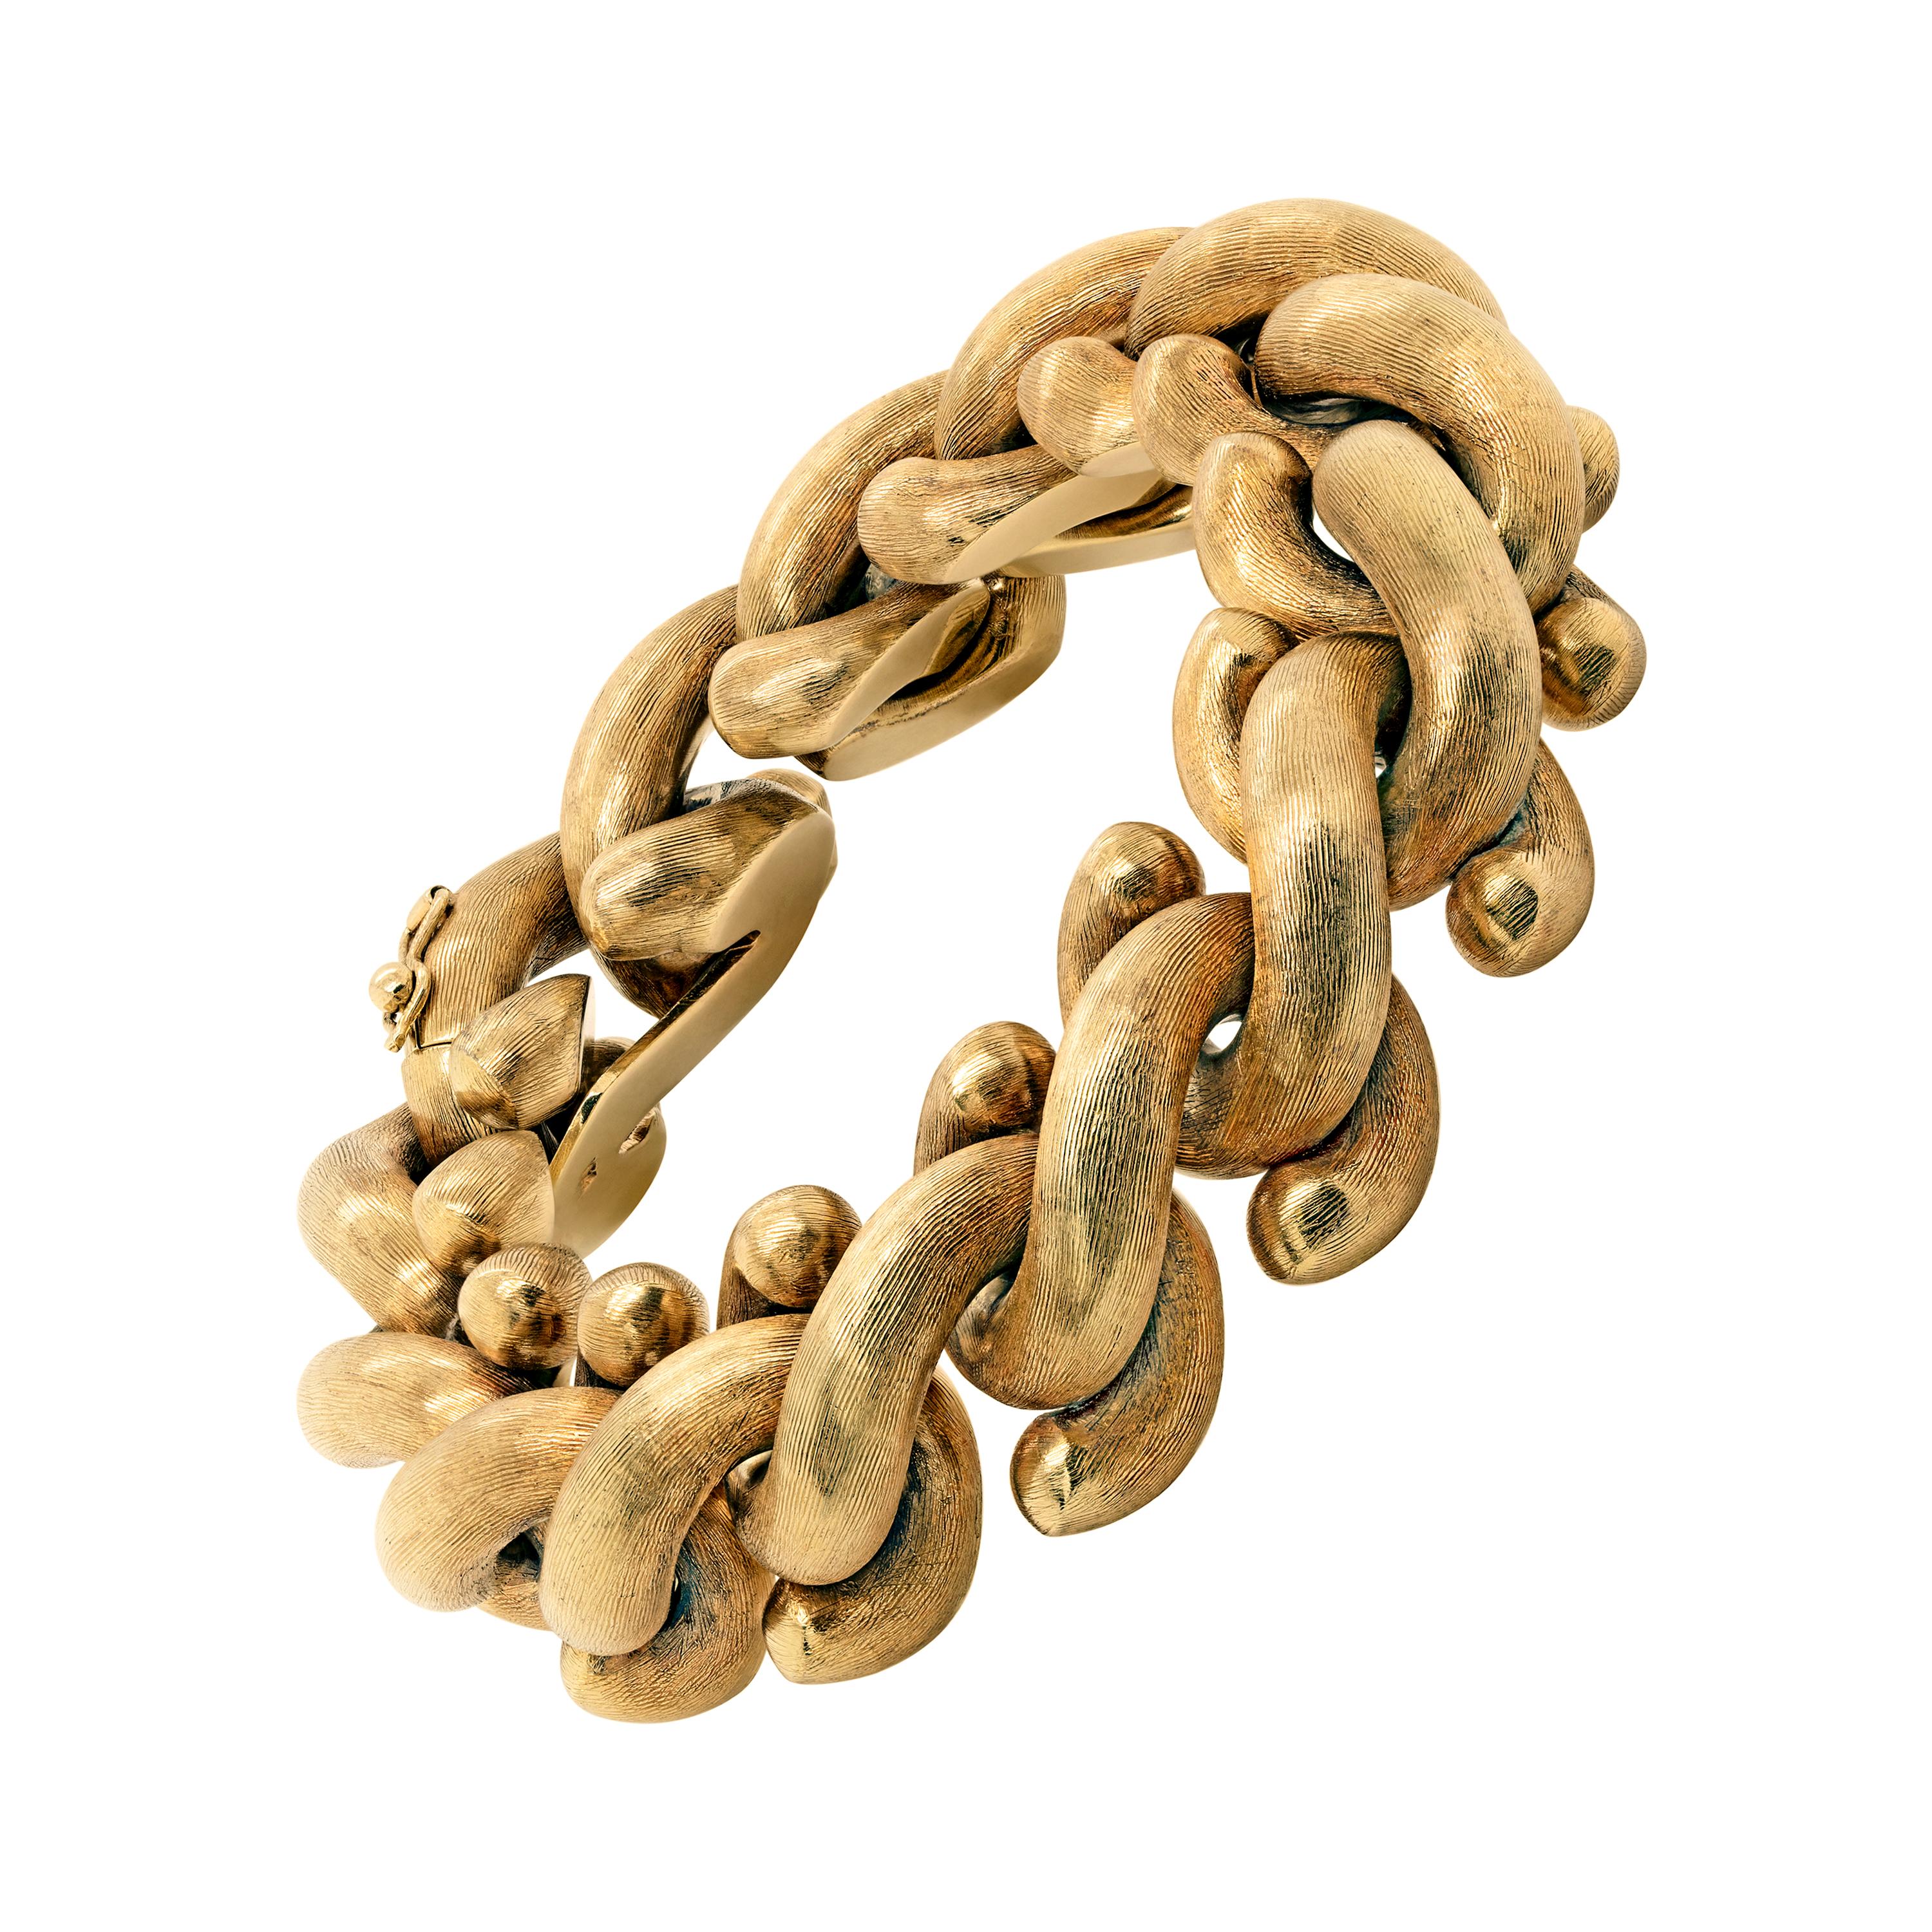 This stunning bracelet is crafted in 14 carat yellow gold, designed with fancy intertwined hook links hand finished with an etched texture giving the bracelet a beautiful sheen in movement. The piece measures 8.5 inches in length and weighs 73.11